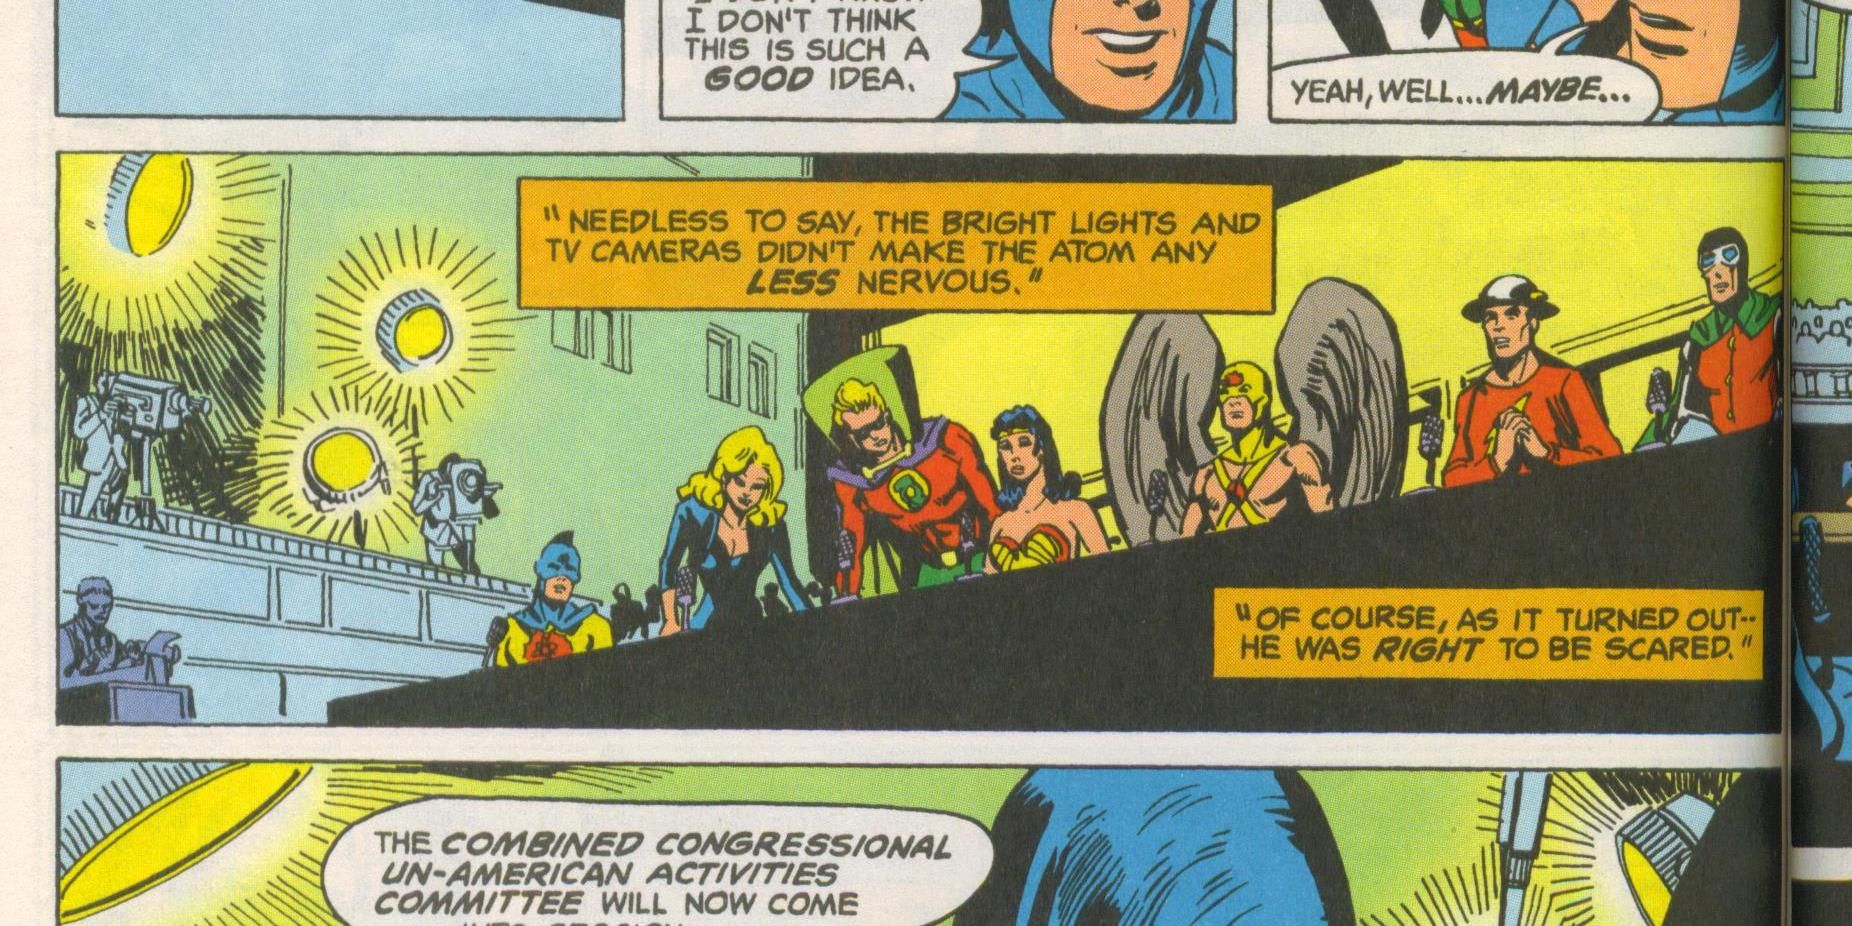 The Justice Society faces Congress